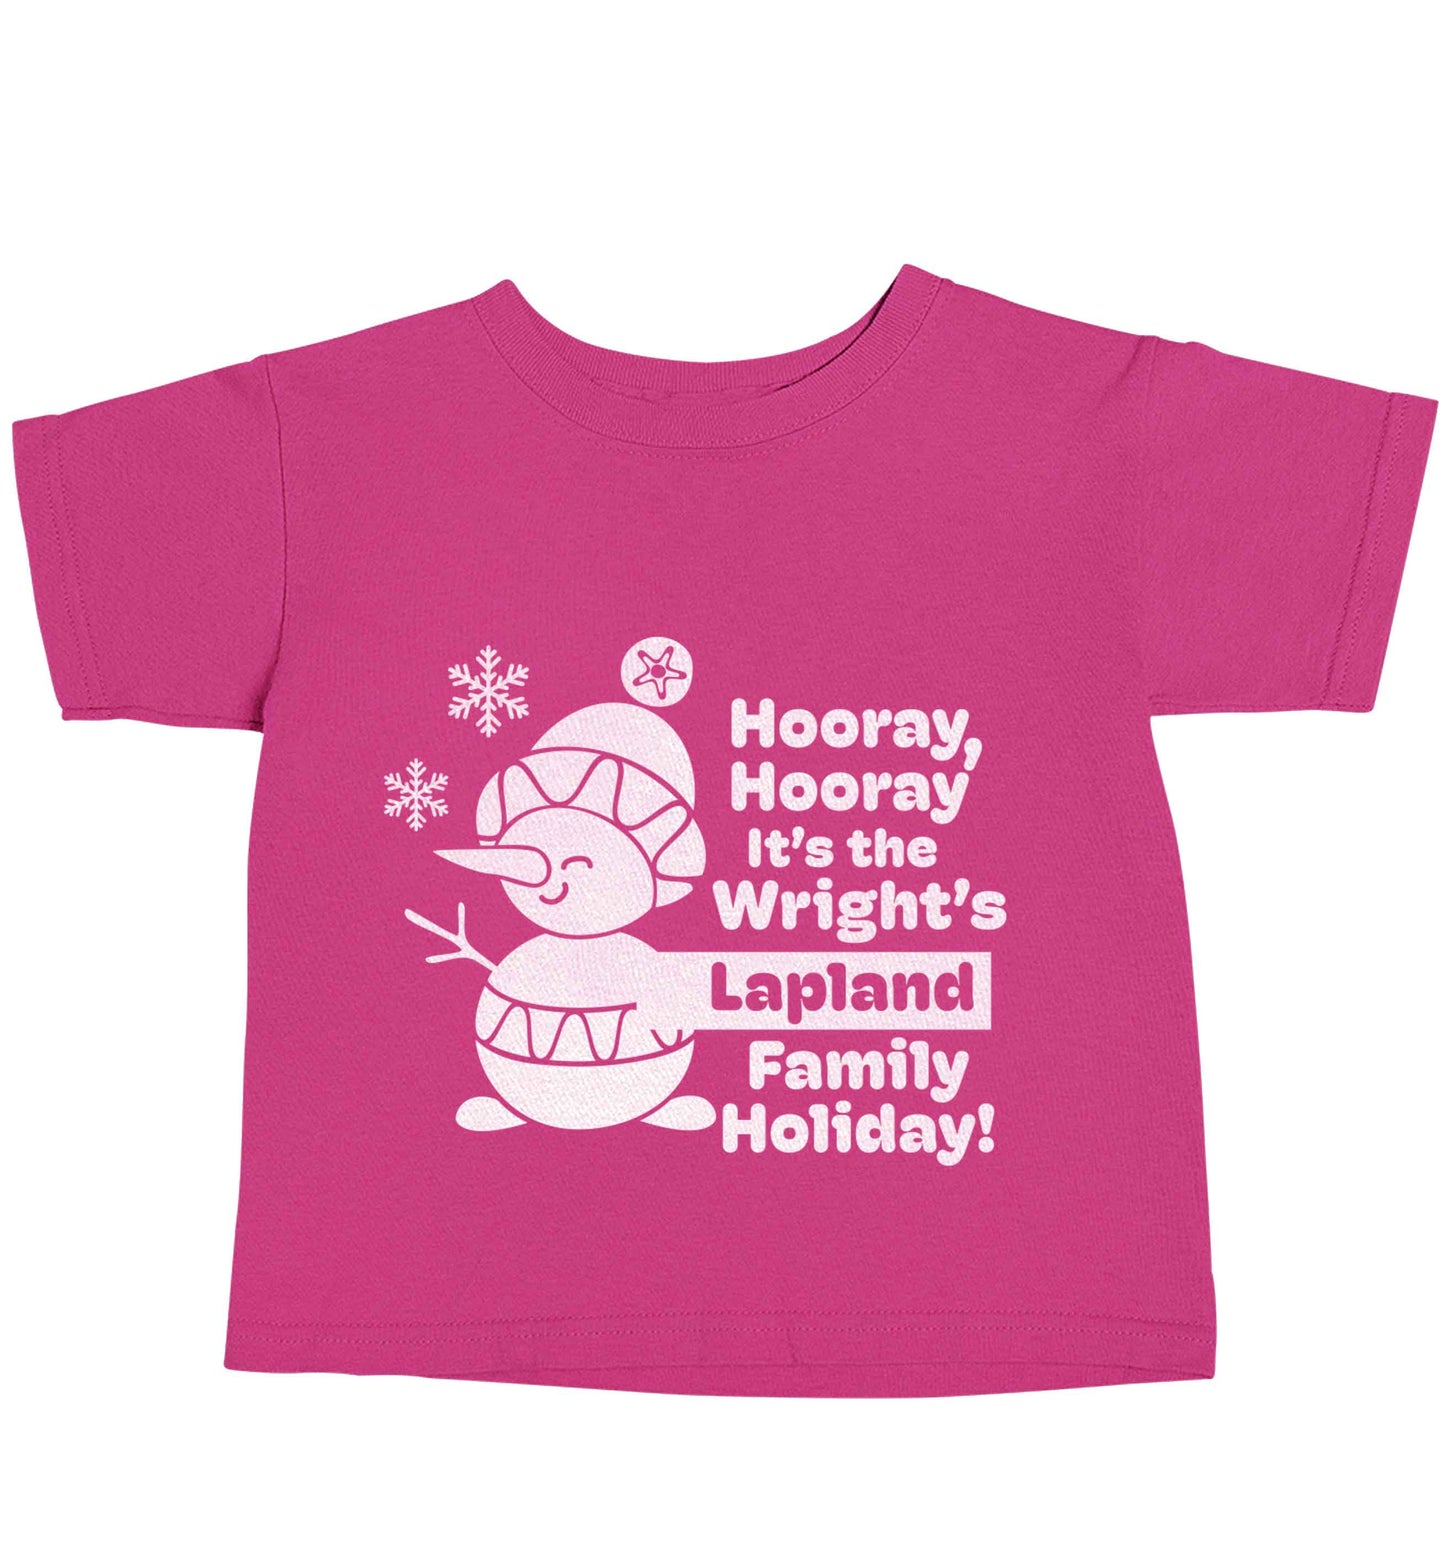 Hooray it's the personalised Lapland holiday! pink baby toddler Tshirt 2 Years